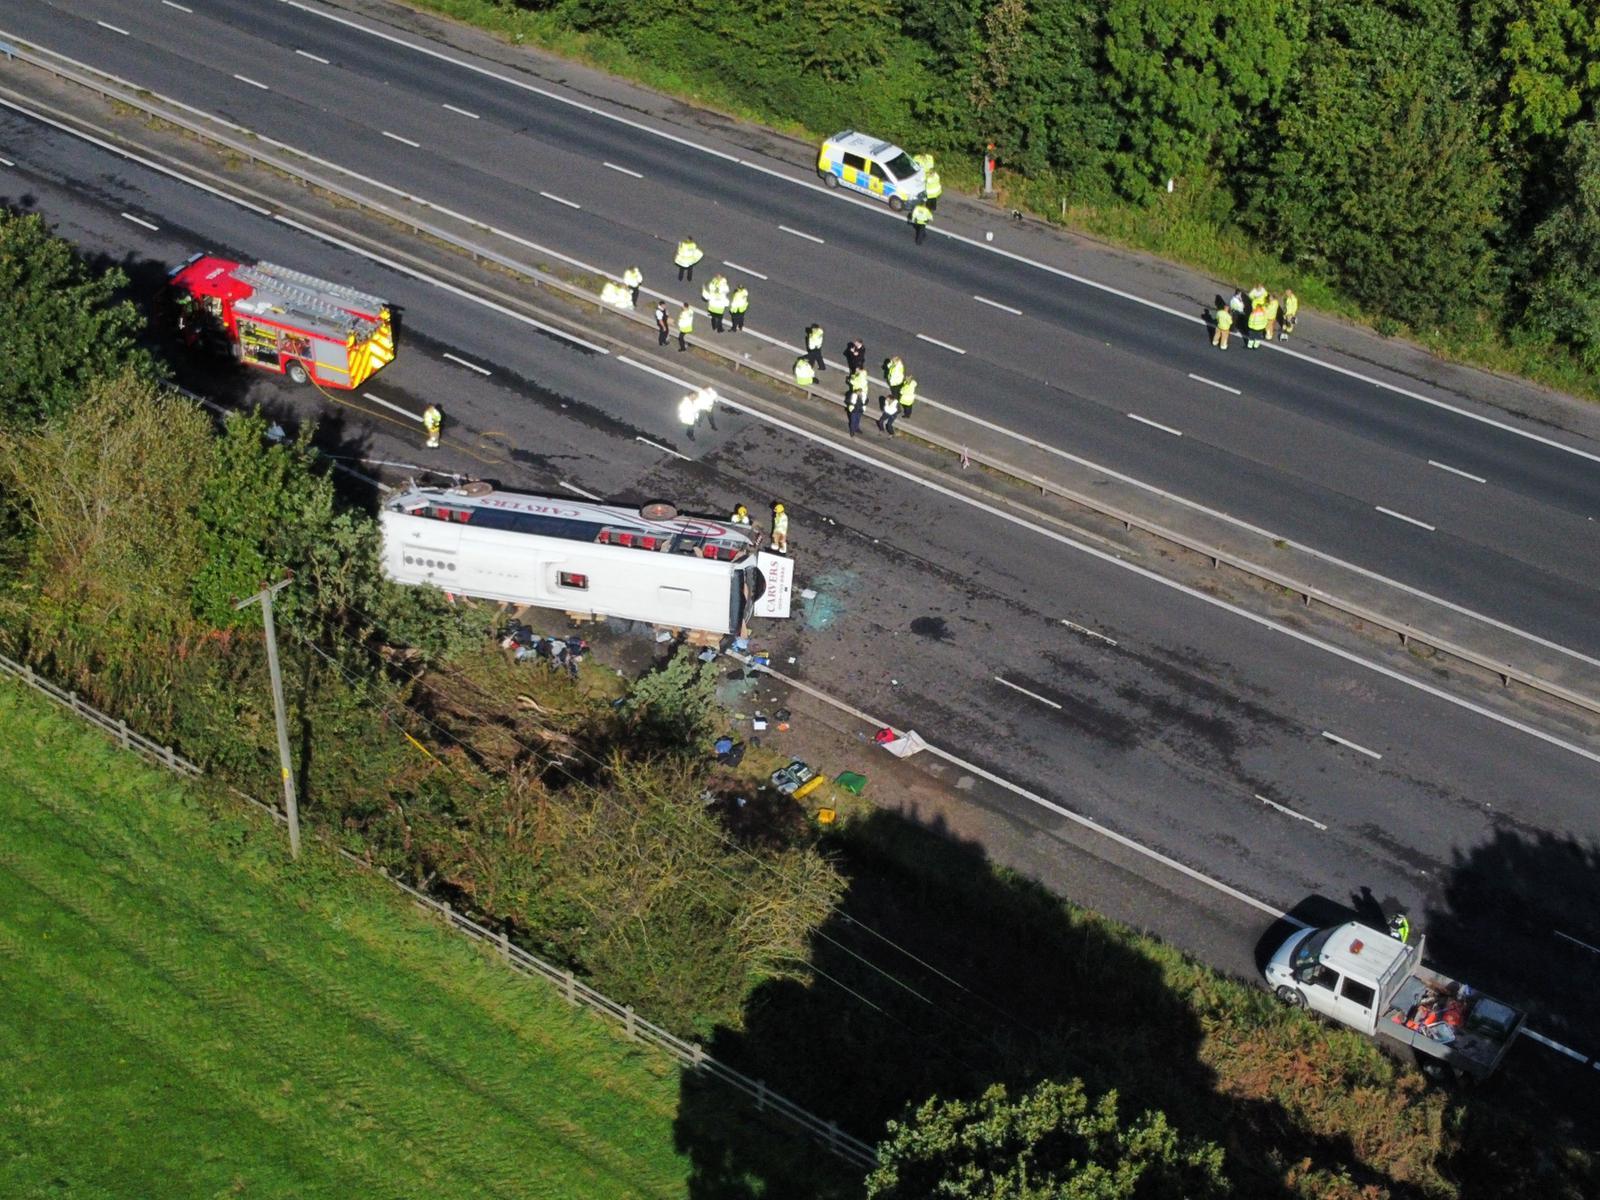 The bus hit a reservation before overturning on the M53